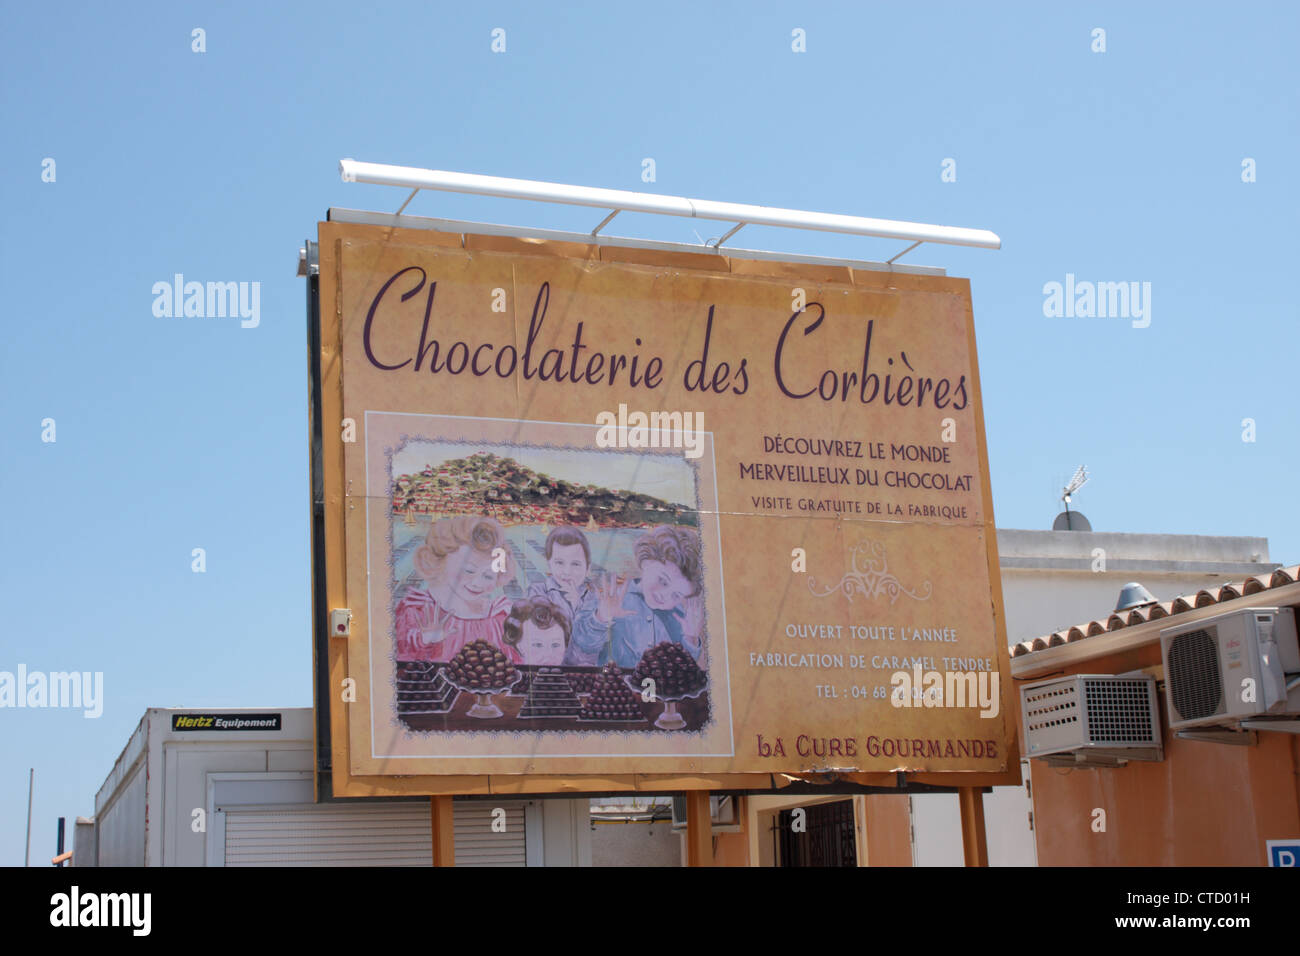 Sign outside the Chocolaterie des Corbieres Narbonne Languedoc-Roussillon France Stock Photo